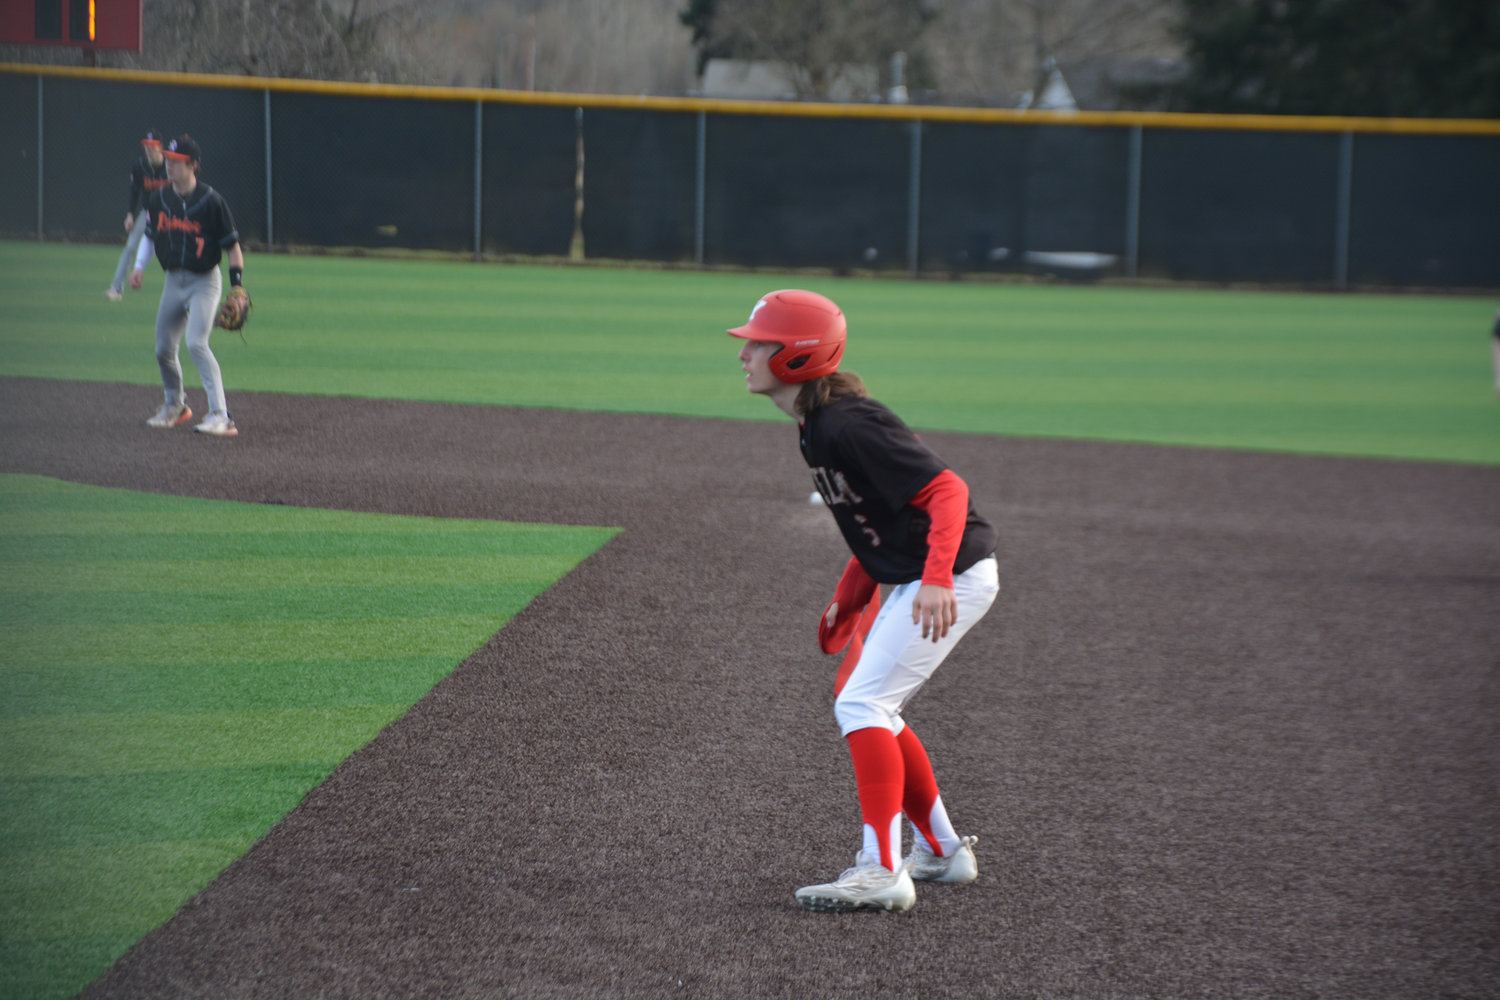 Freshman Tornado second baseman Lincoln Ramirez takes a lead at first base during a game against Rainier on Friday, March 10.